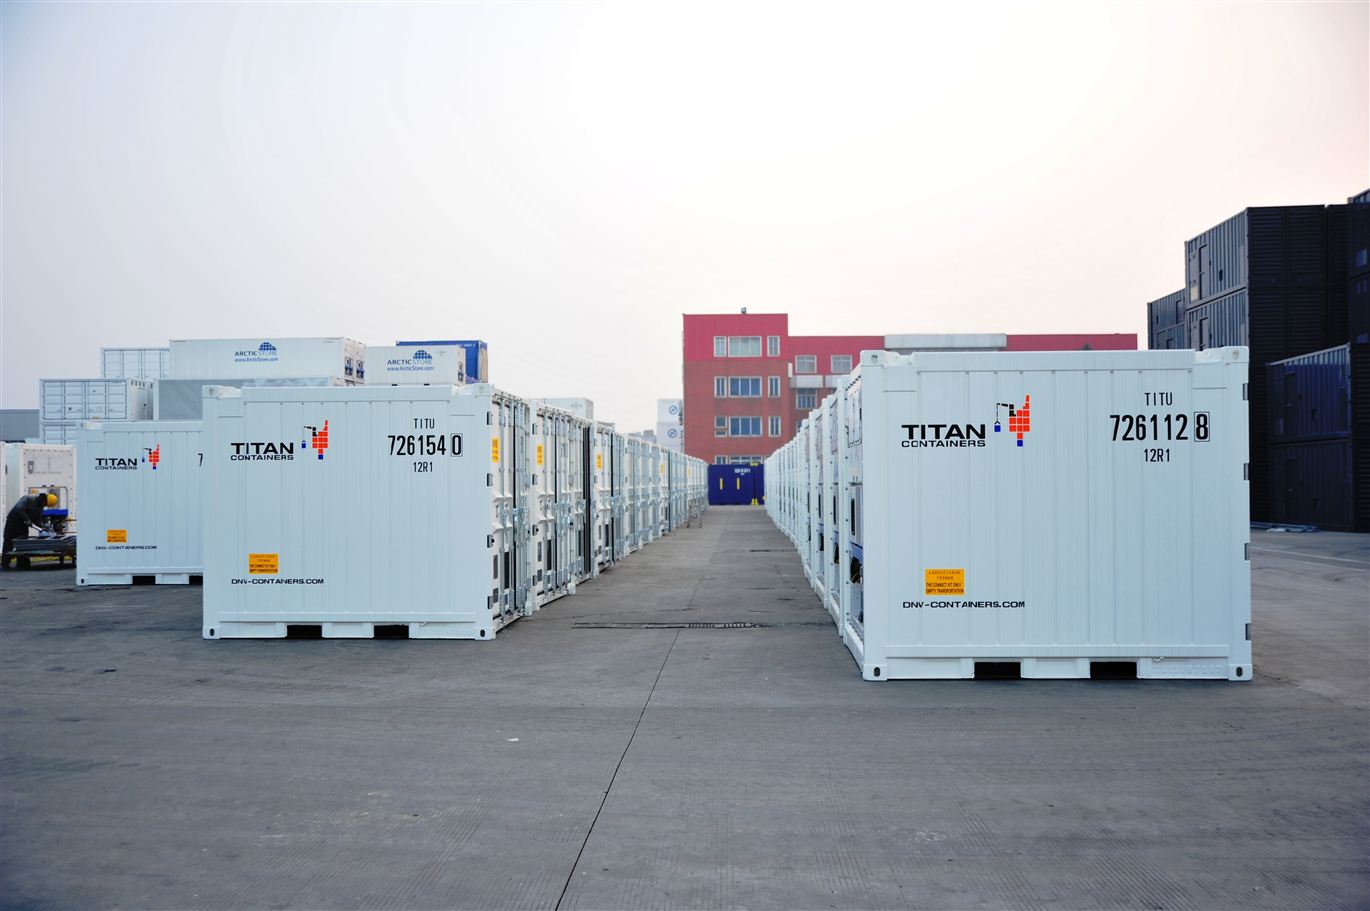 DNV Containers